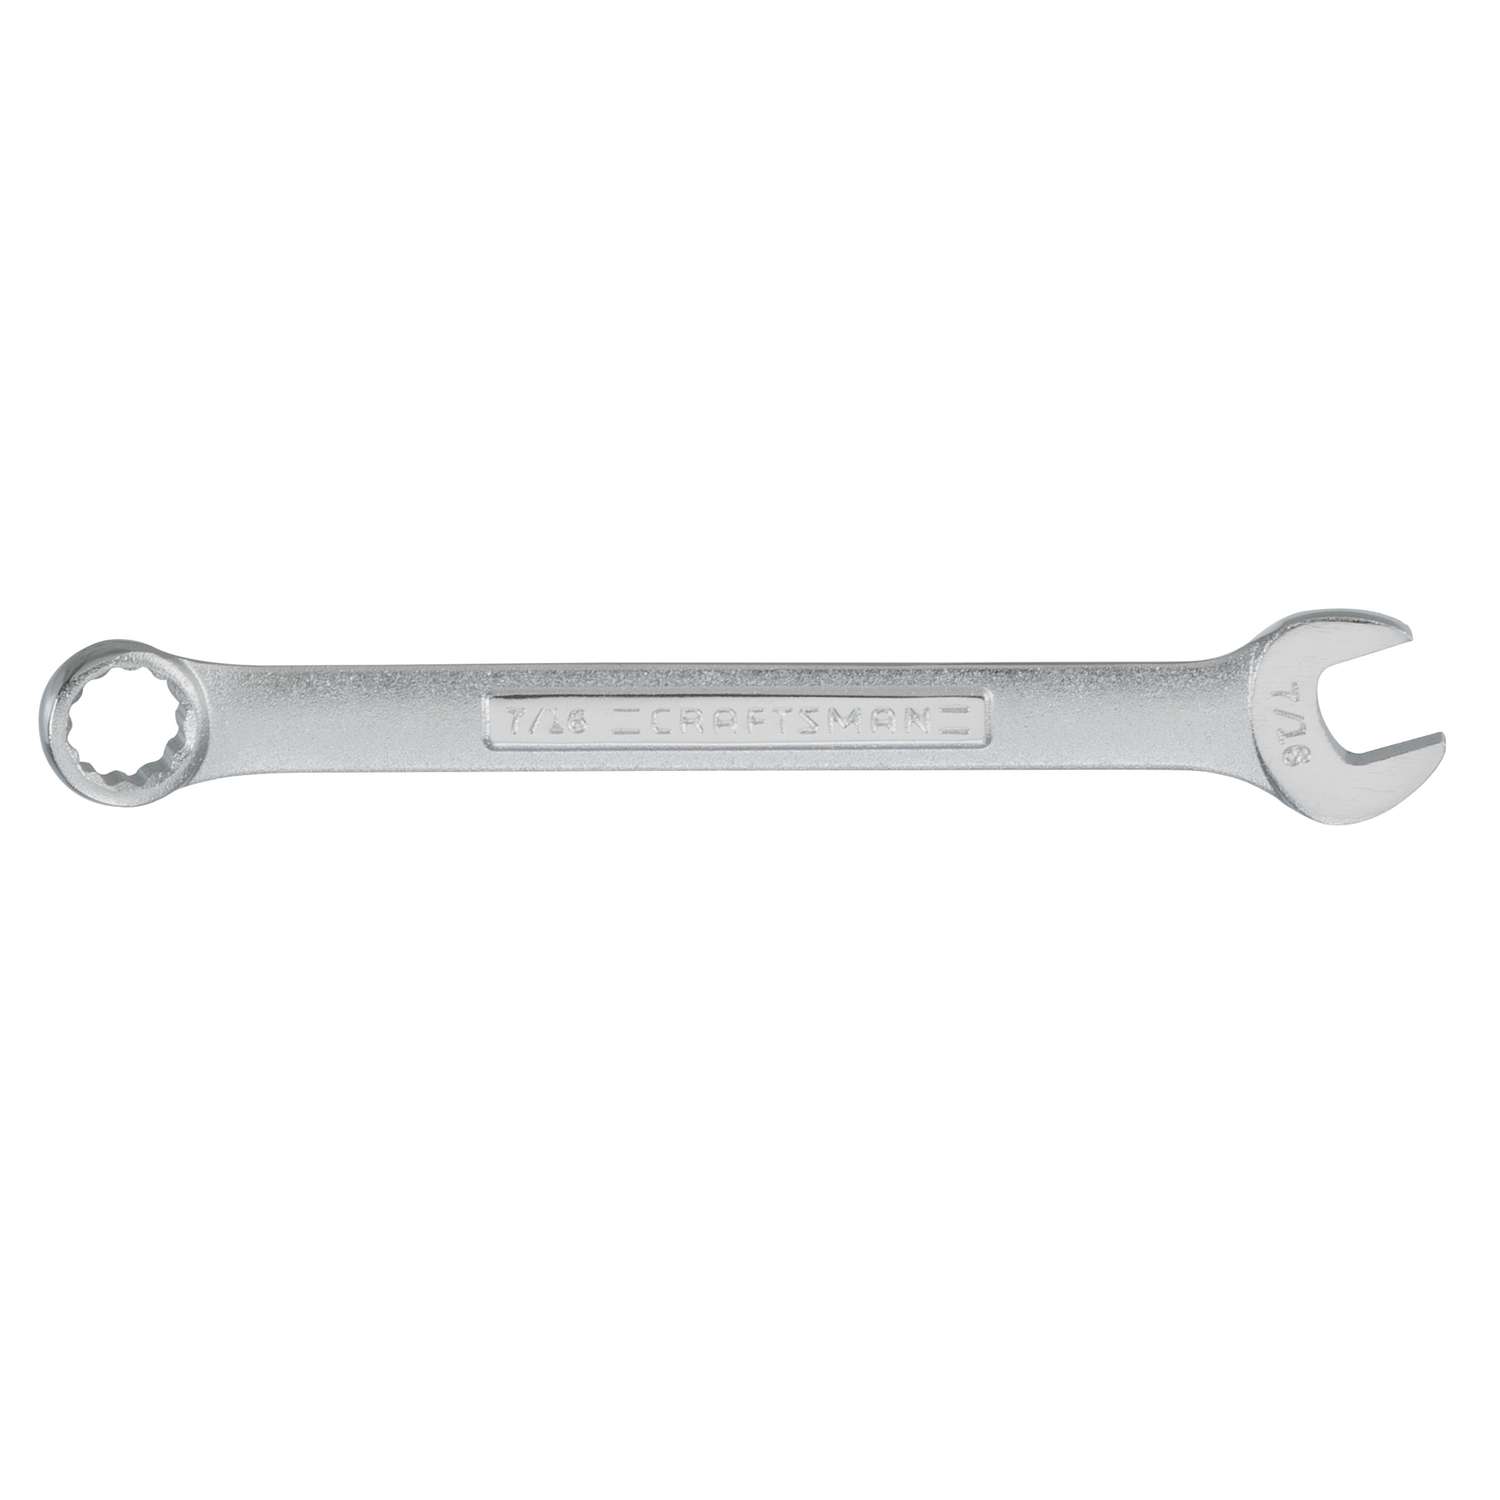 12 Point Combination Wrench USA Brand NEW 20218 L-2788 ALLEN 1" Made in USA 